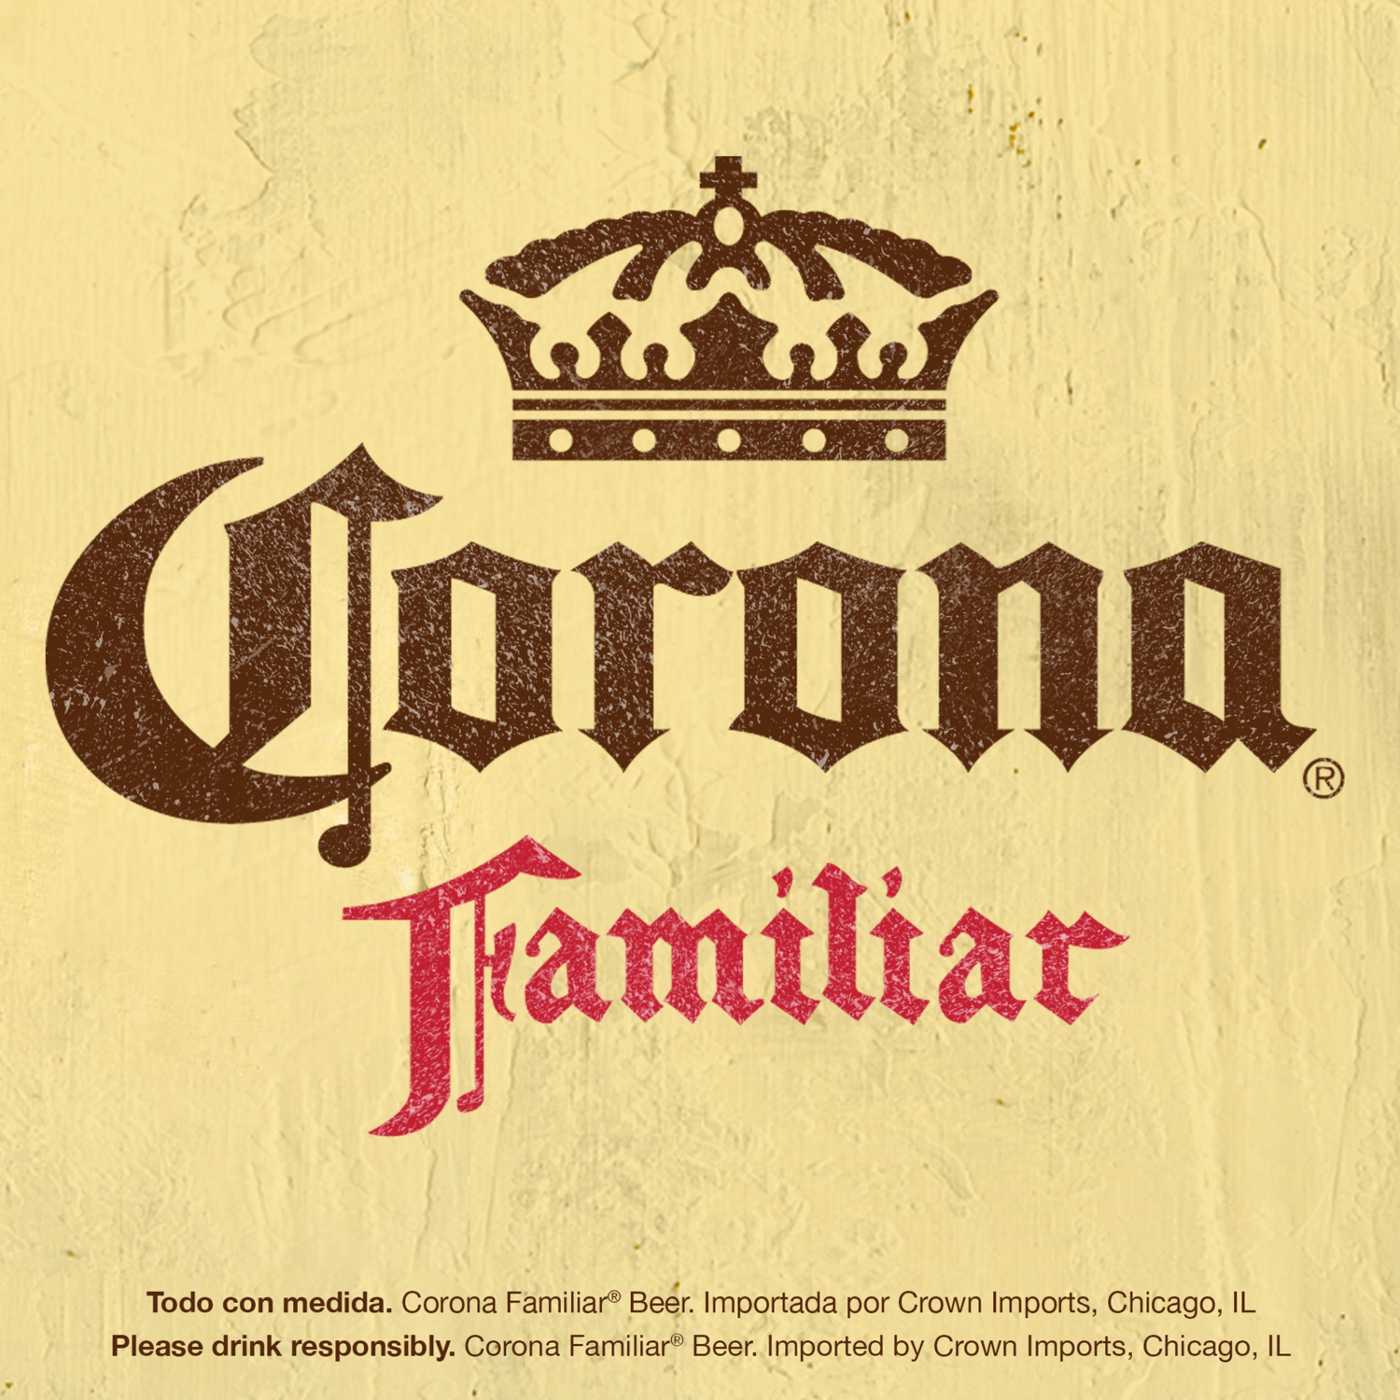 Corona Familiar Mexican Lager Import Beer 12 oz Bottles, 12 pk; image 6 of 10